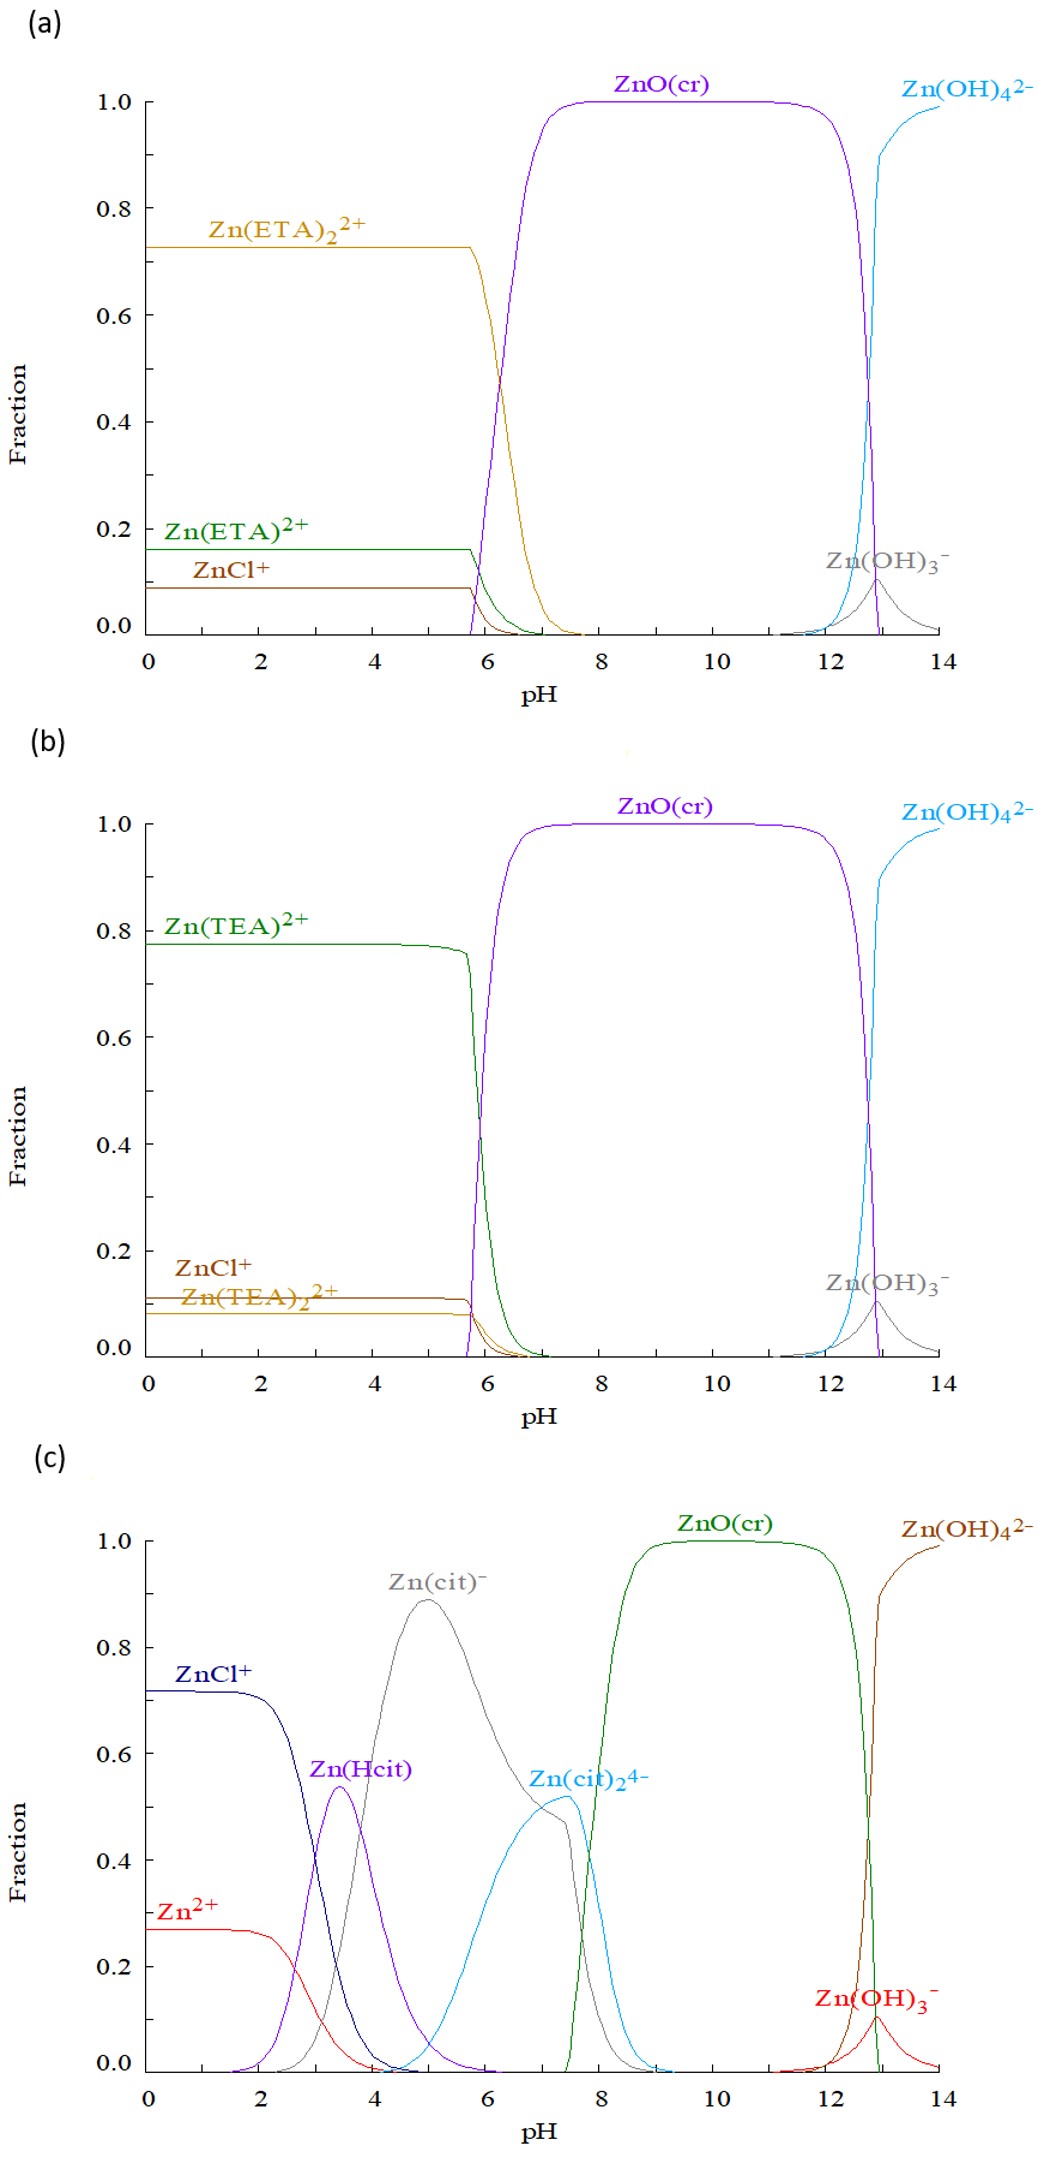 Species distribution diagrams calculated at 90 °C for (a) Zn-ETA, (b) Zn-TEA, and (c) Zn-Cit systems.